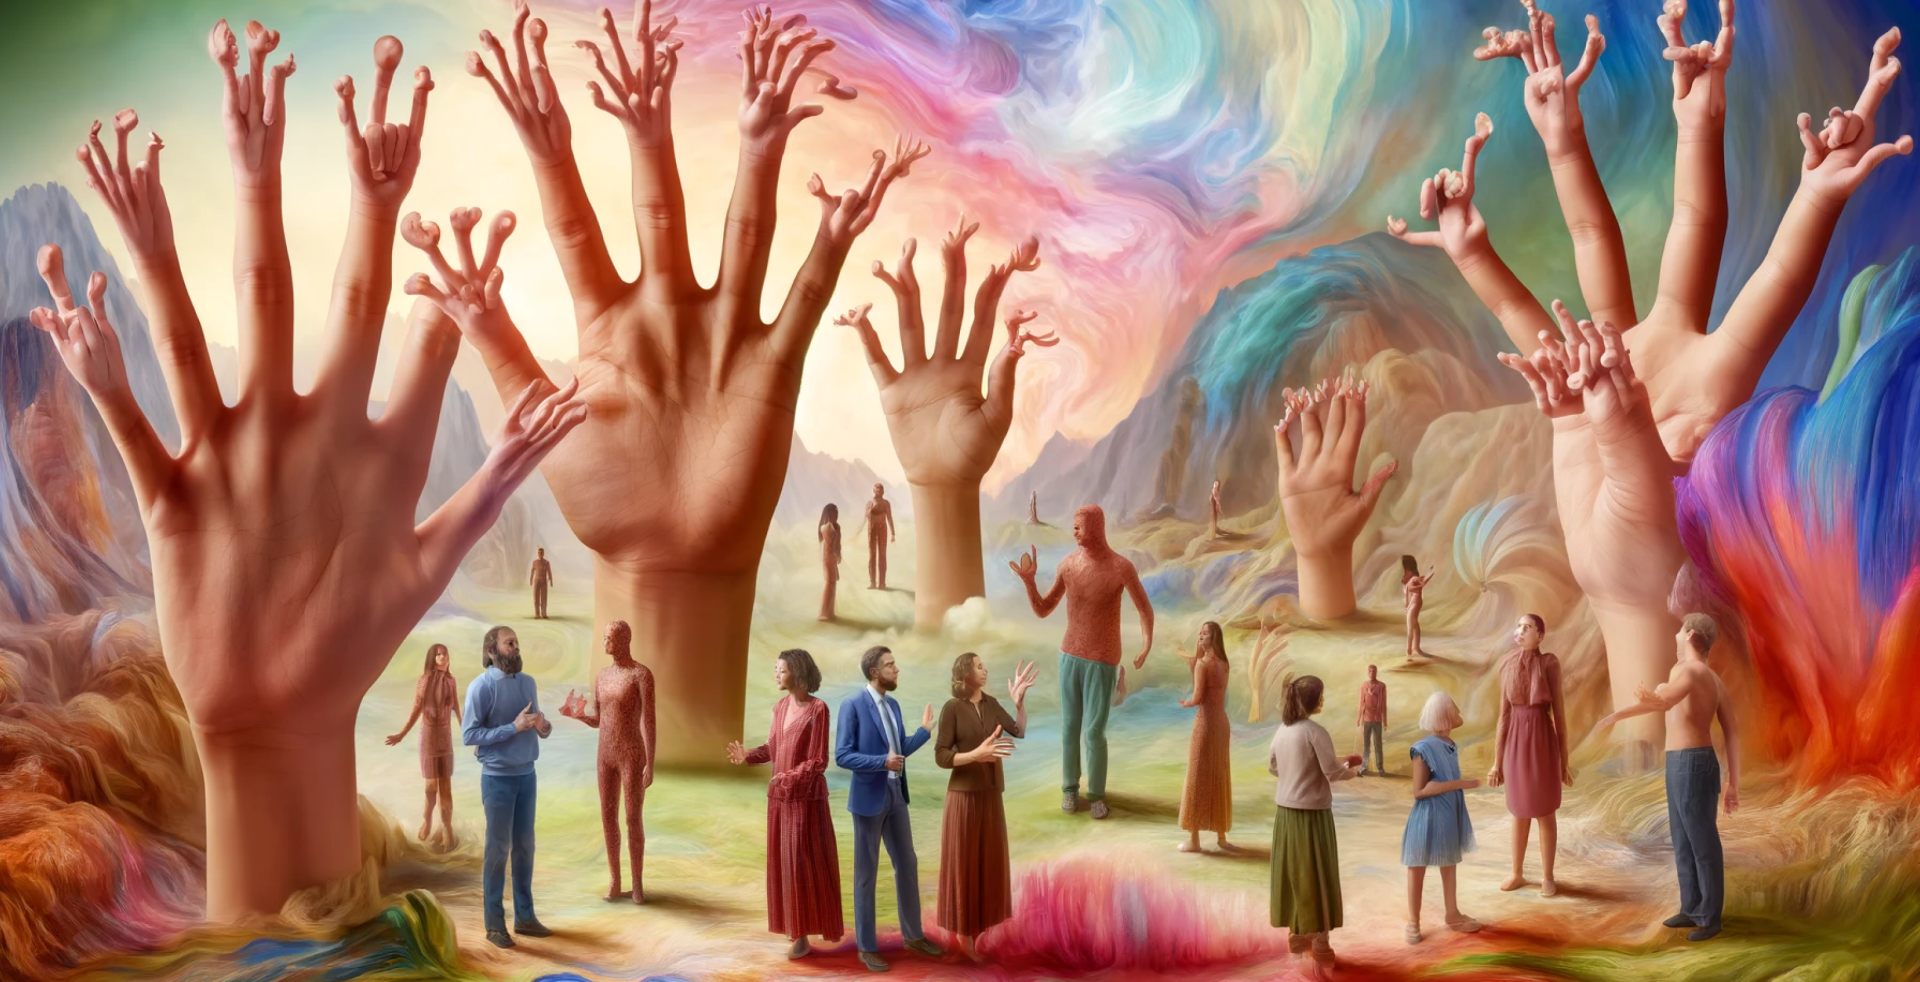 People walk through a forest of hands with hands